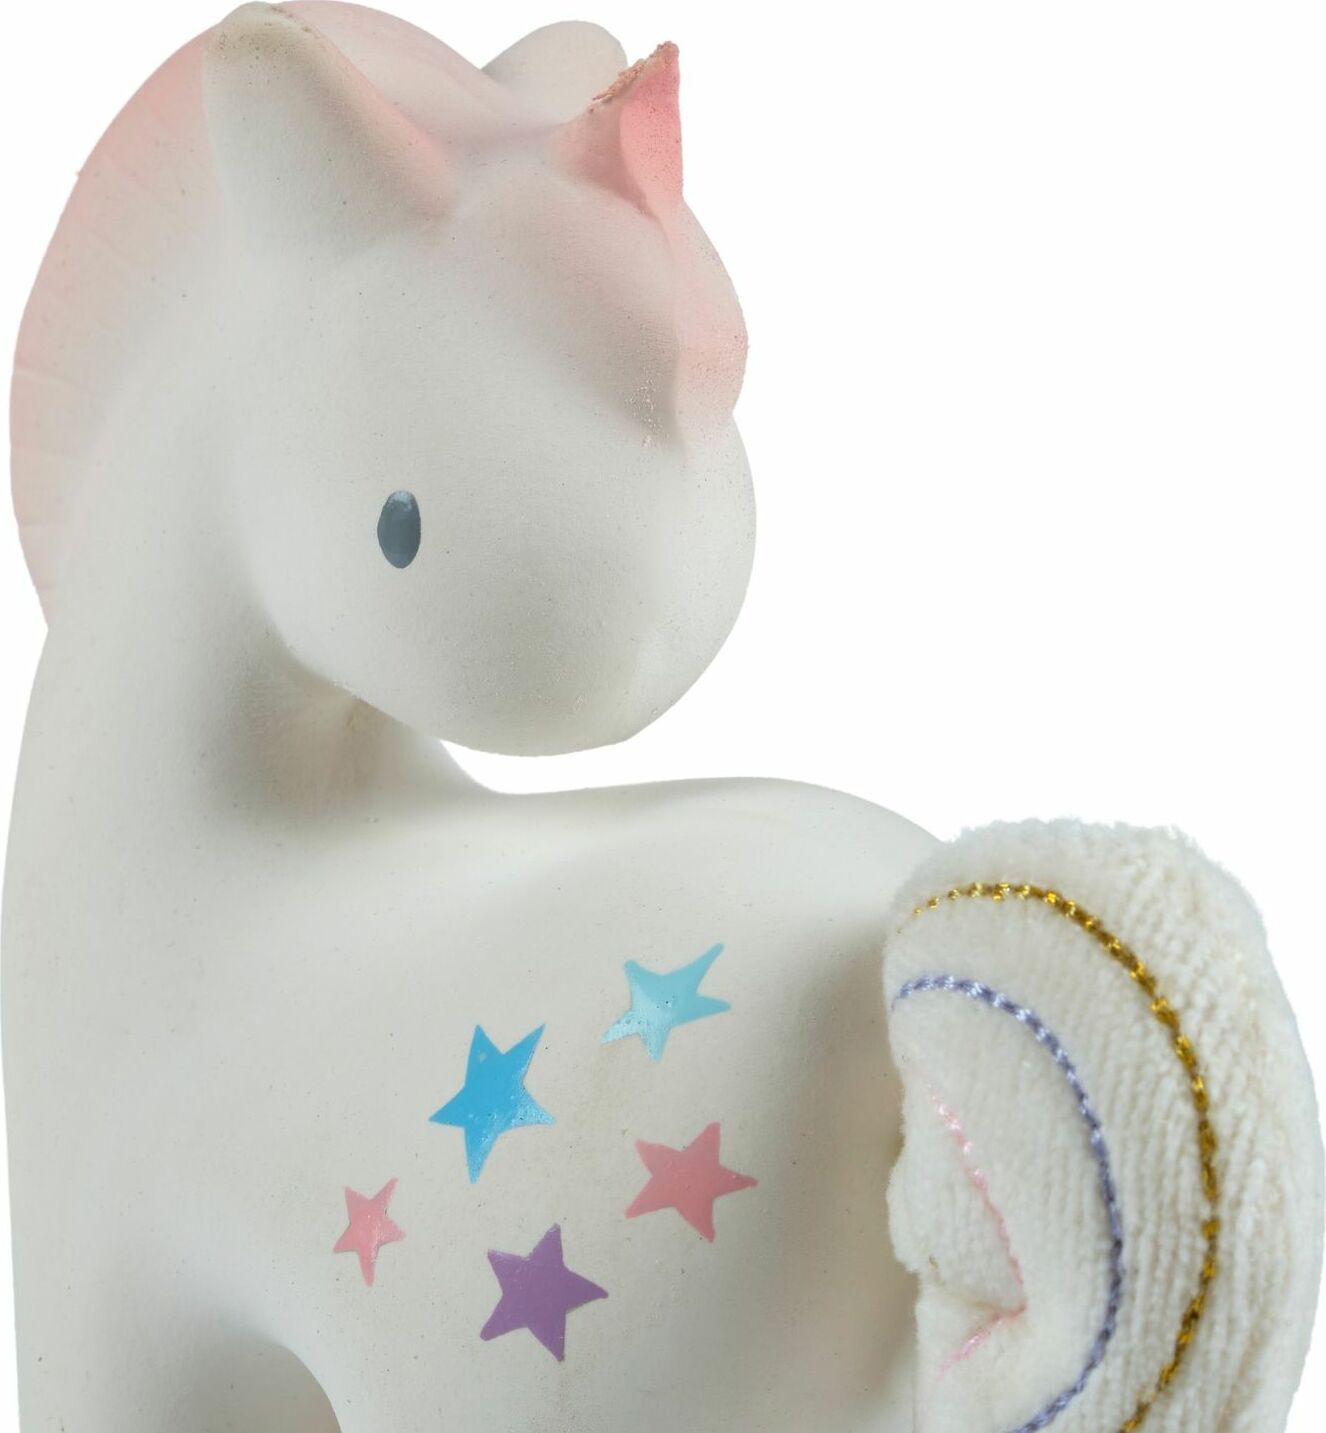 Cotton Candy Unicorn Natural Organic Rubber Rattle With Crinkle Tail